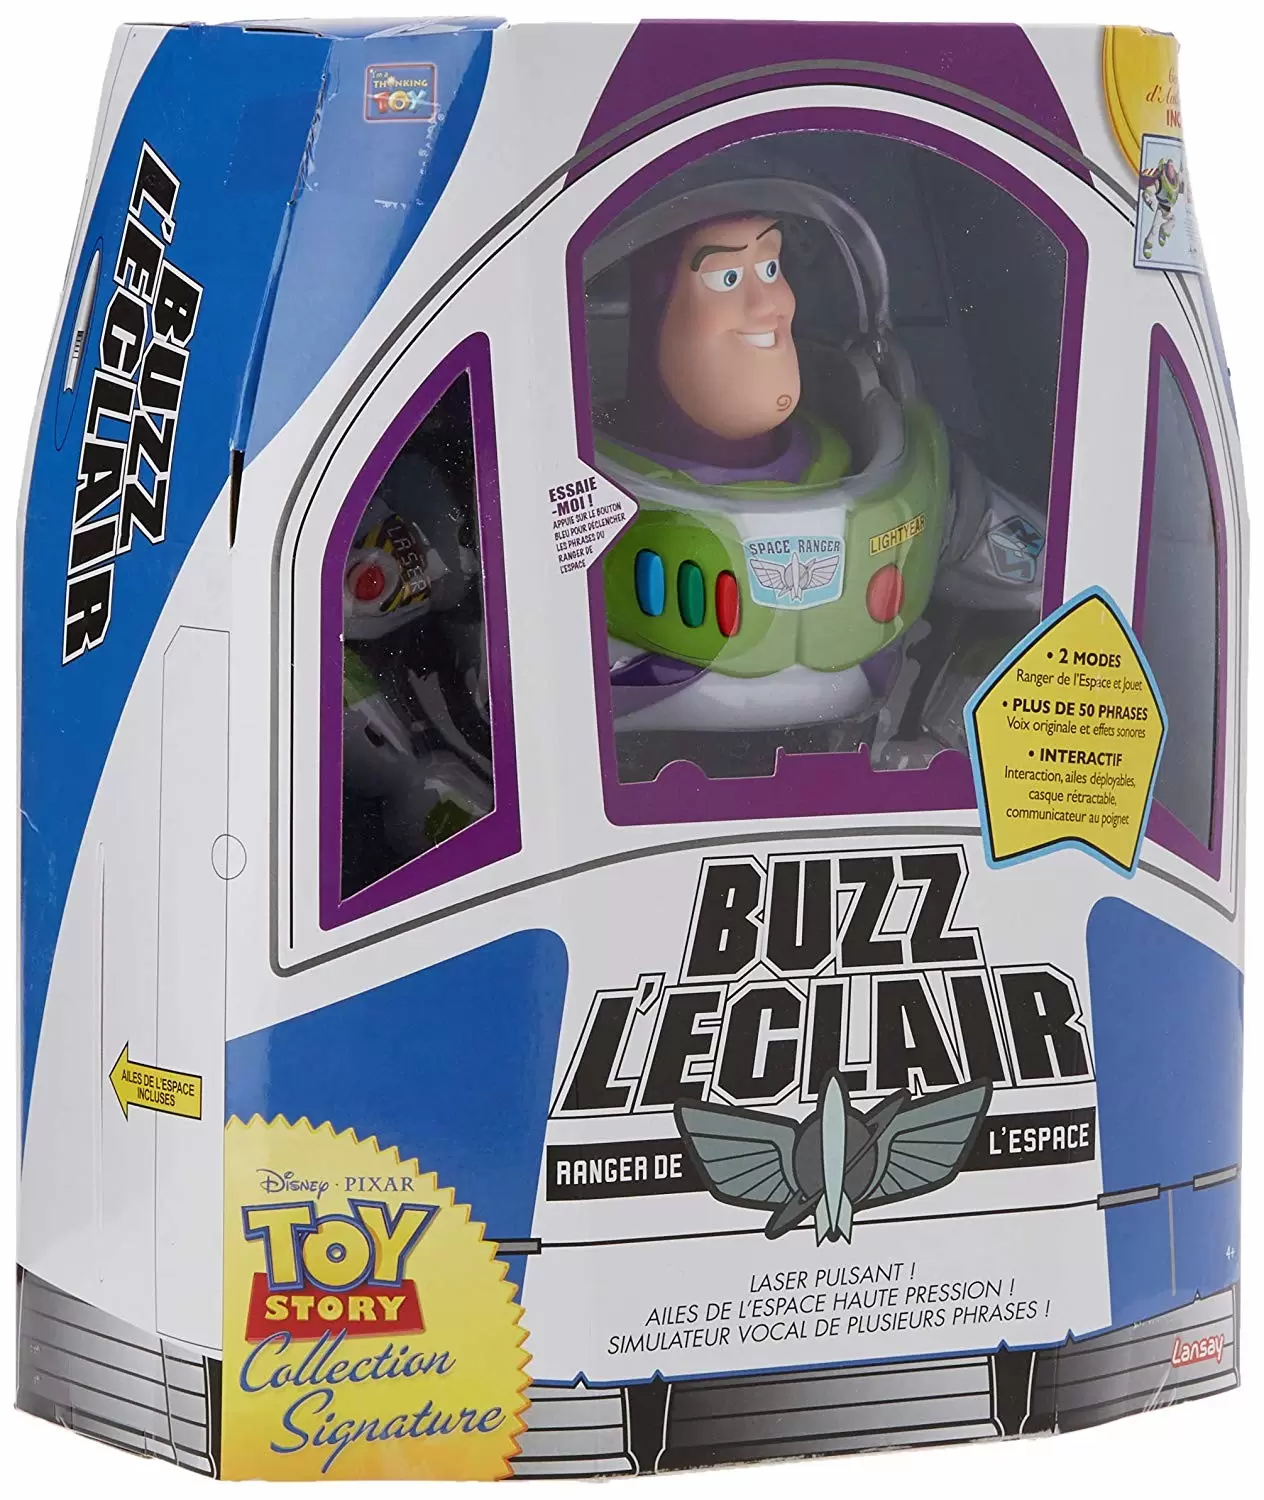 Buzz Lightyear - Toy Story Signature Collection action figure